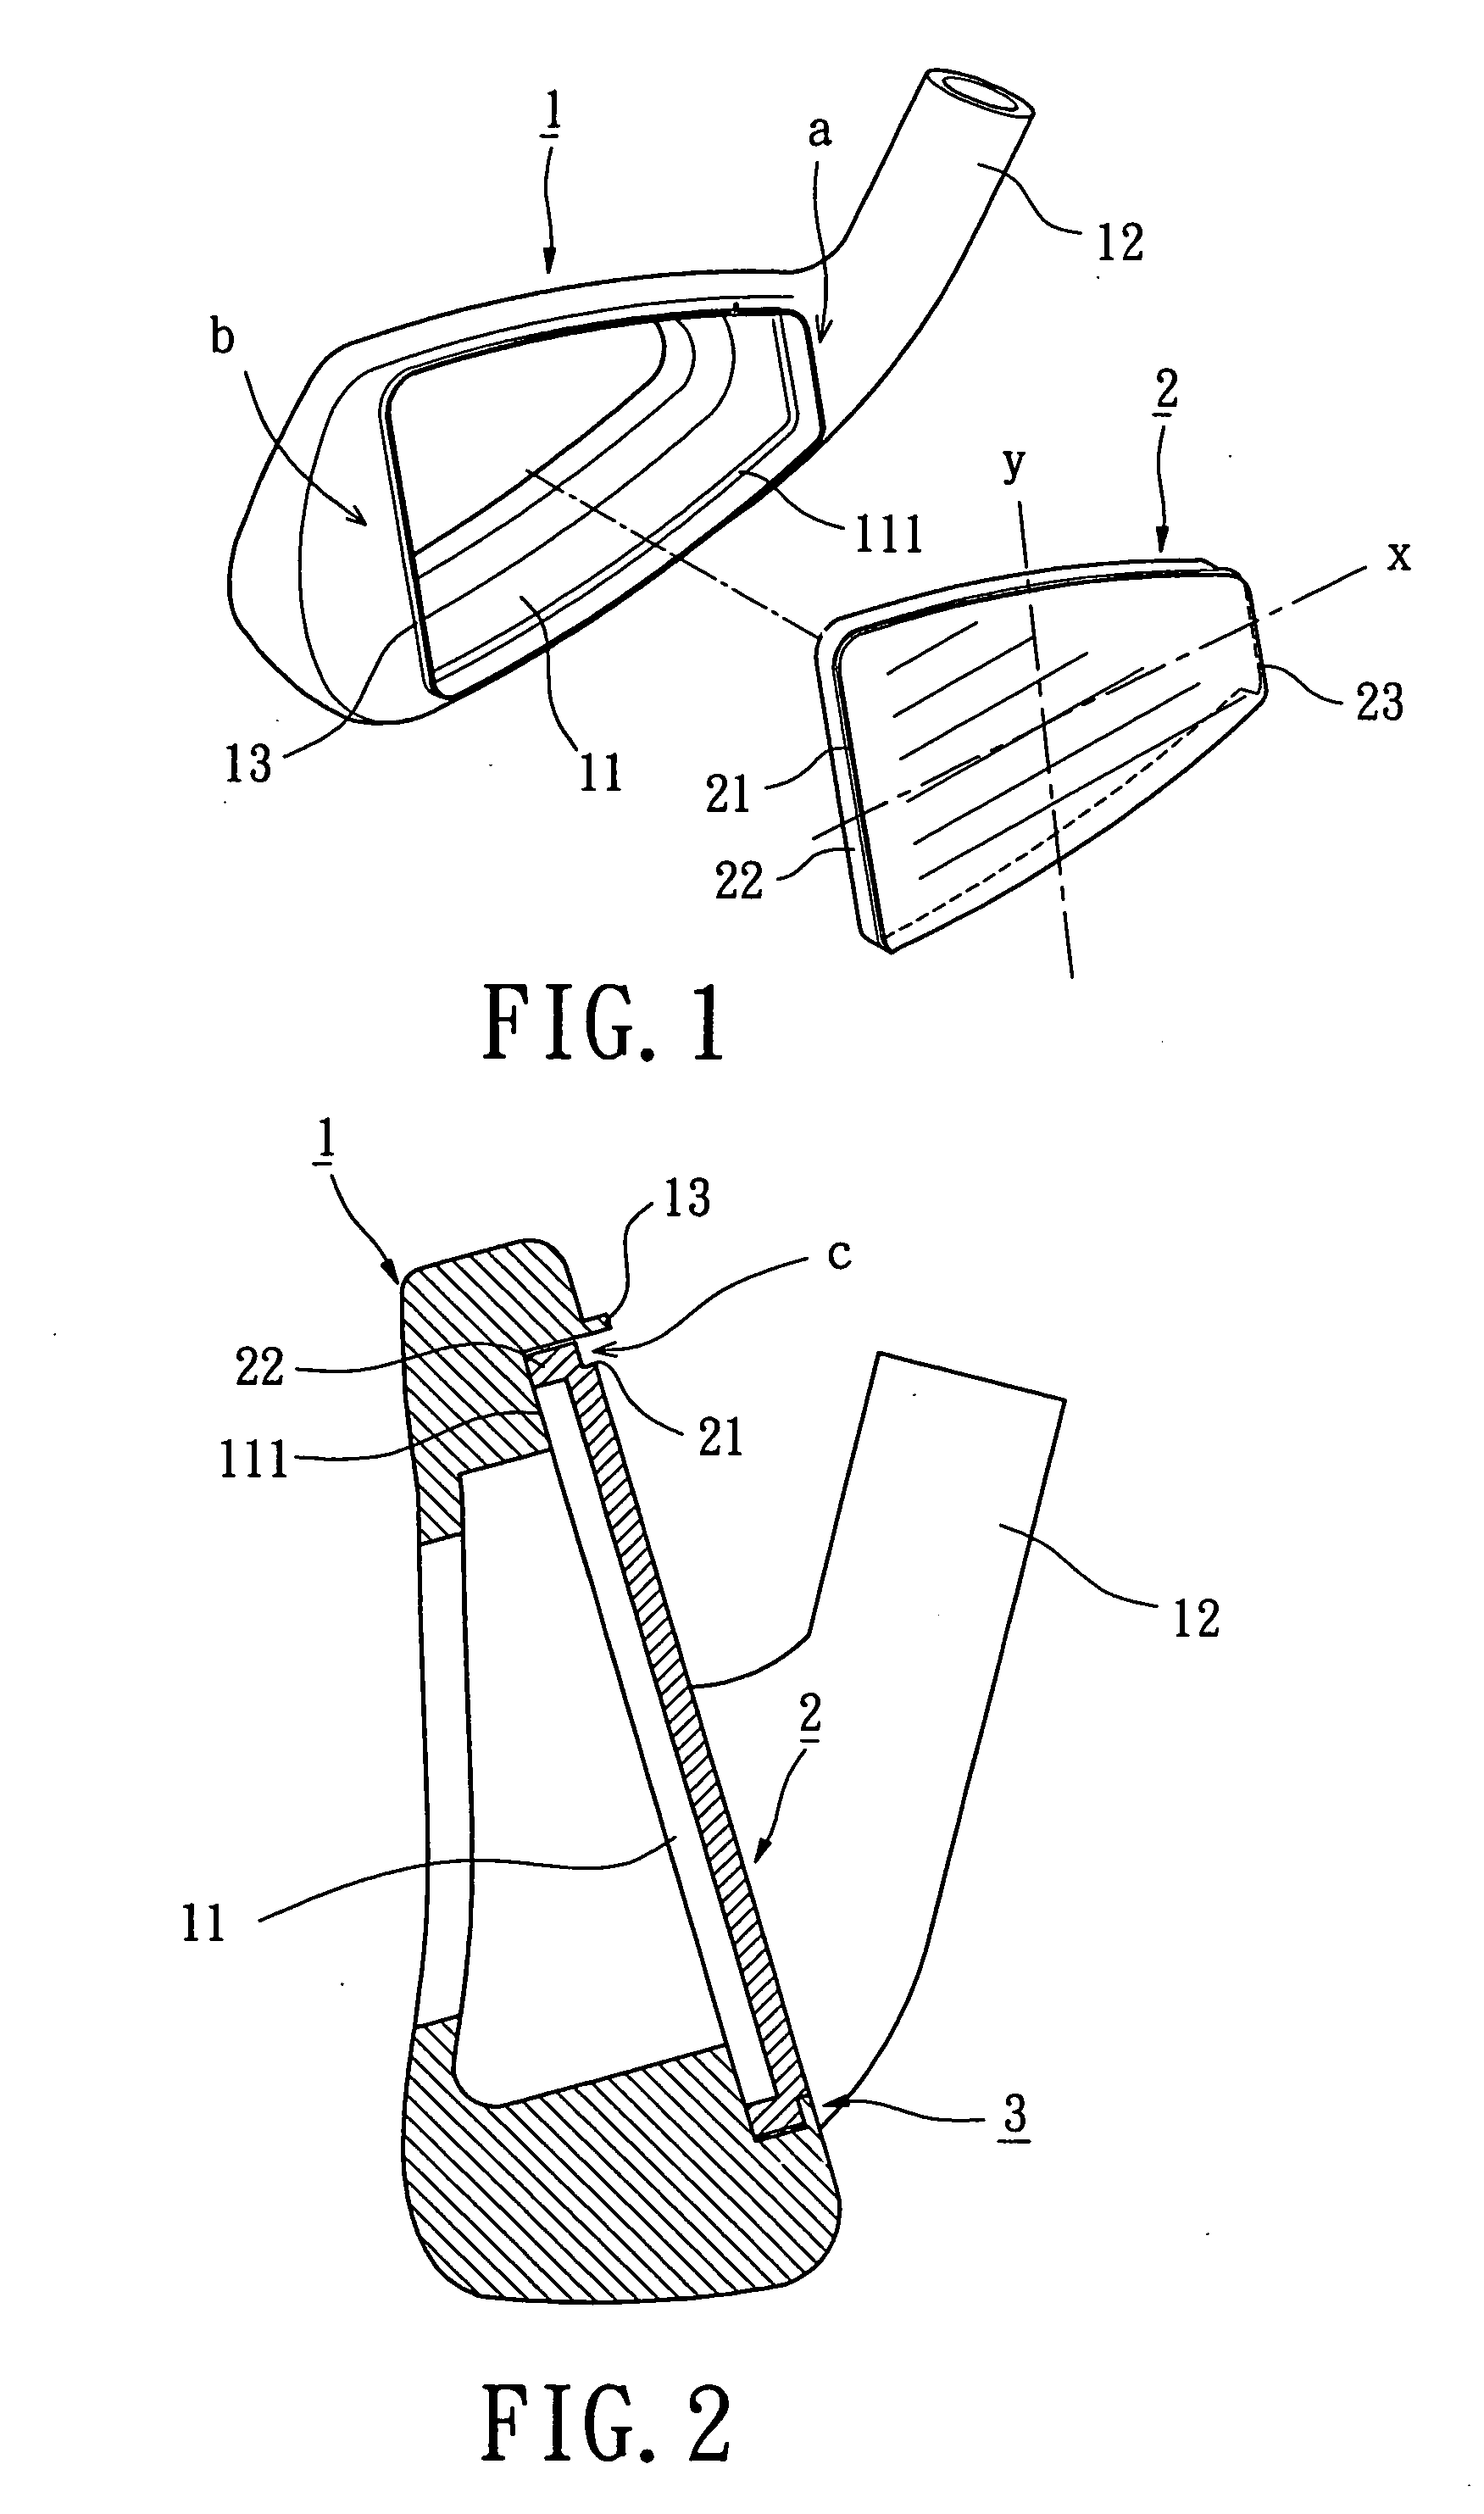 Upright bent edge structure of a striking plate for combing with a golf club head body